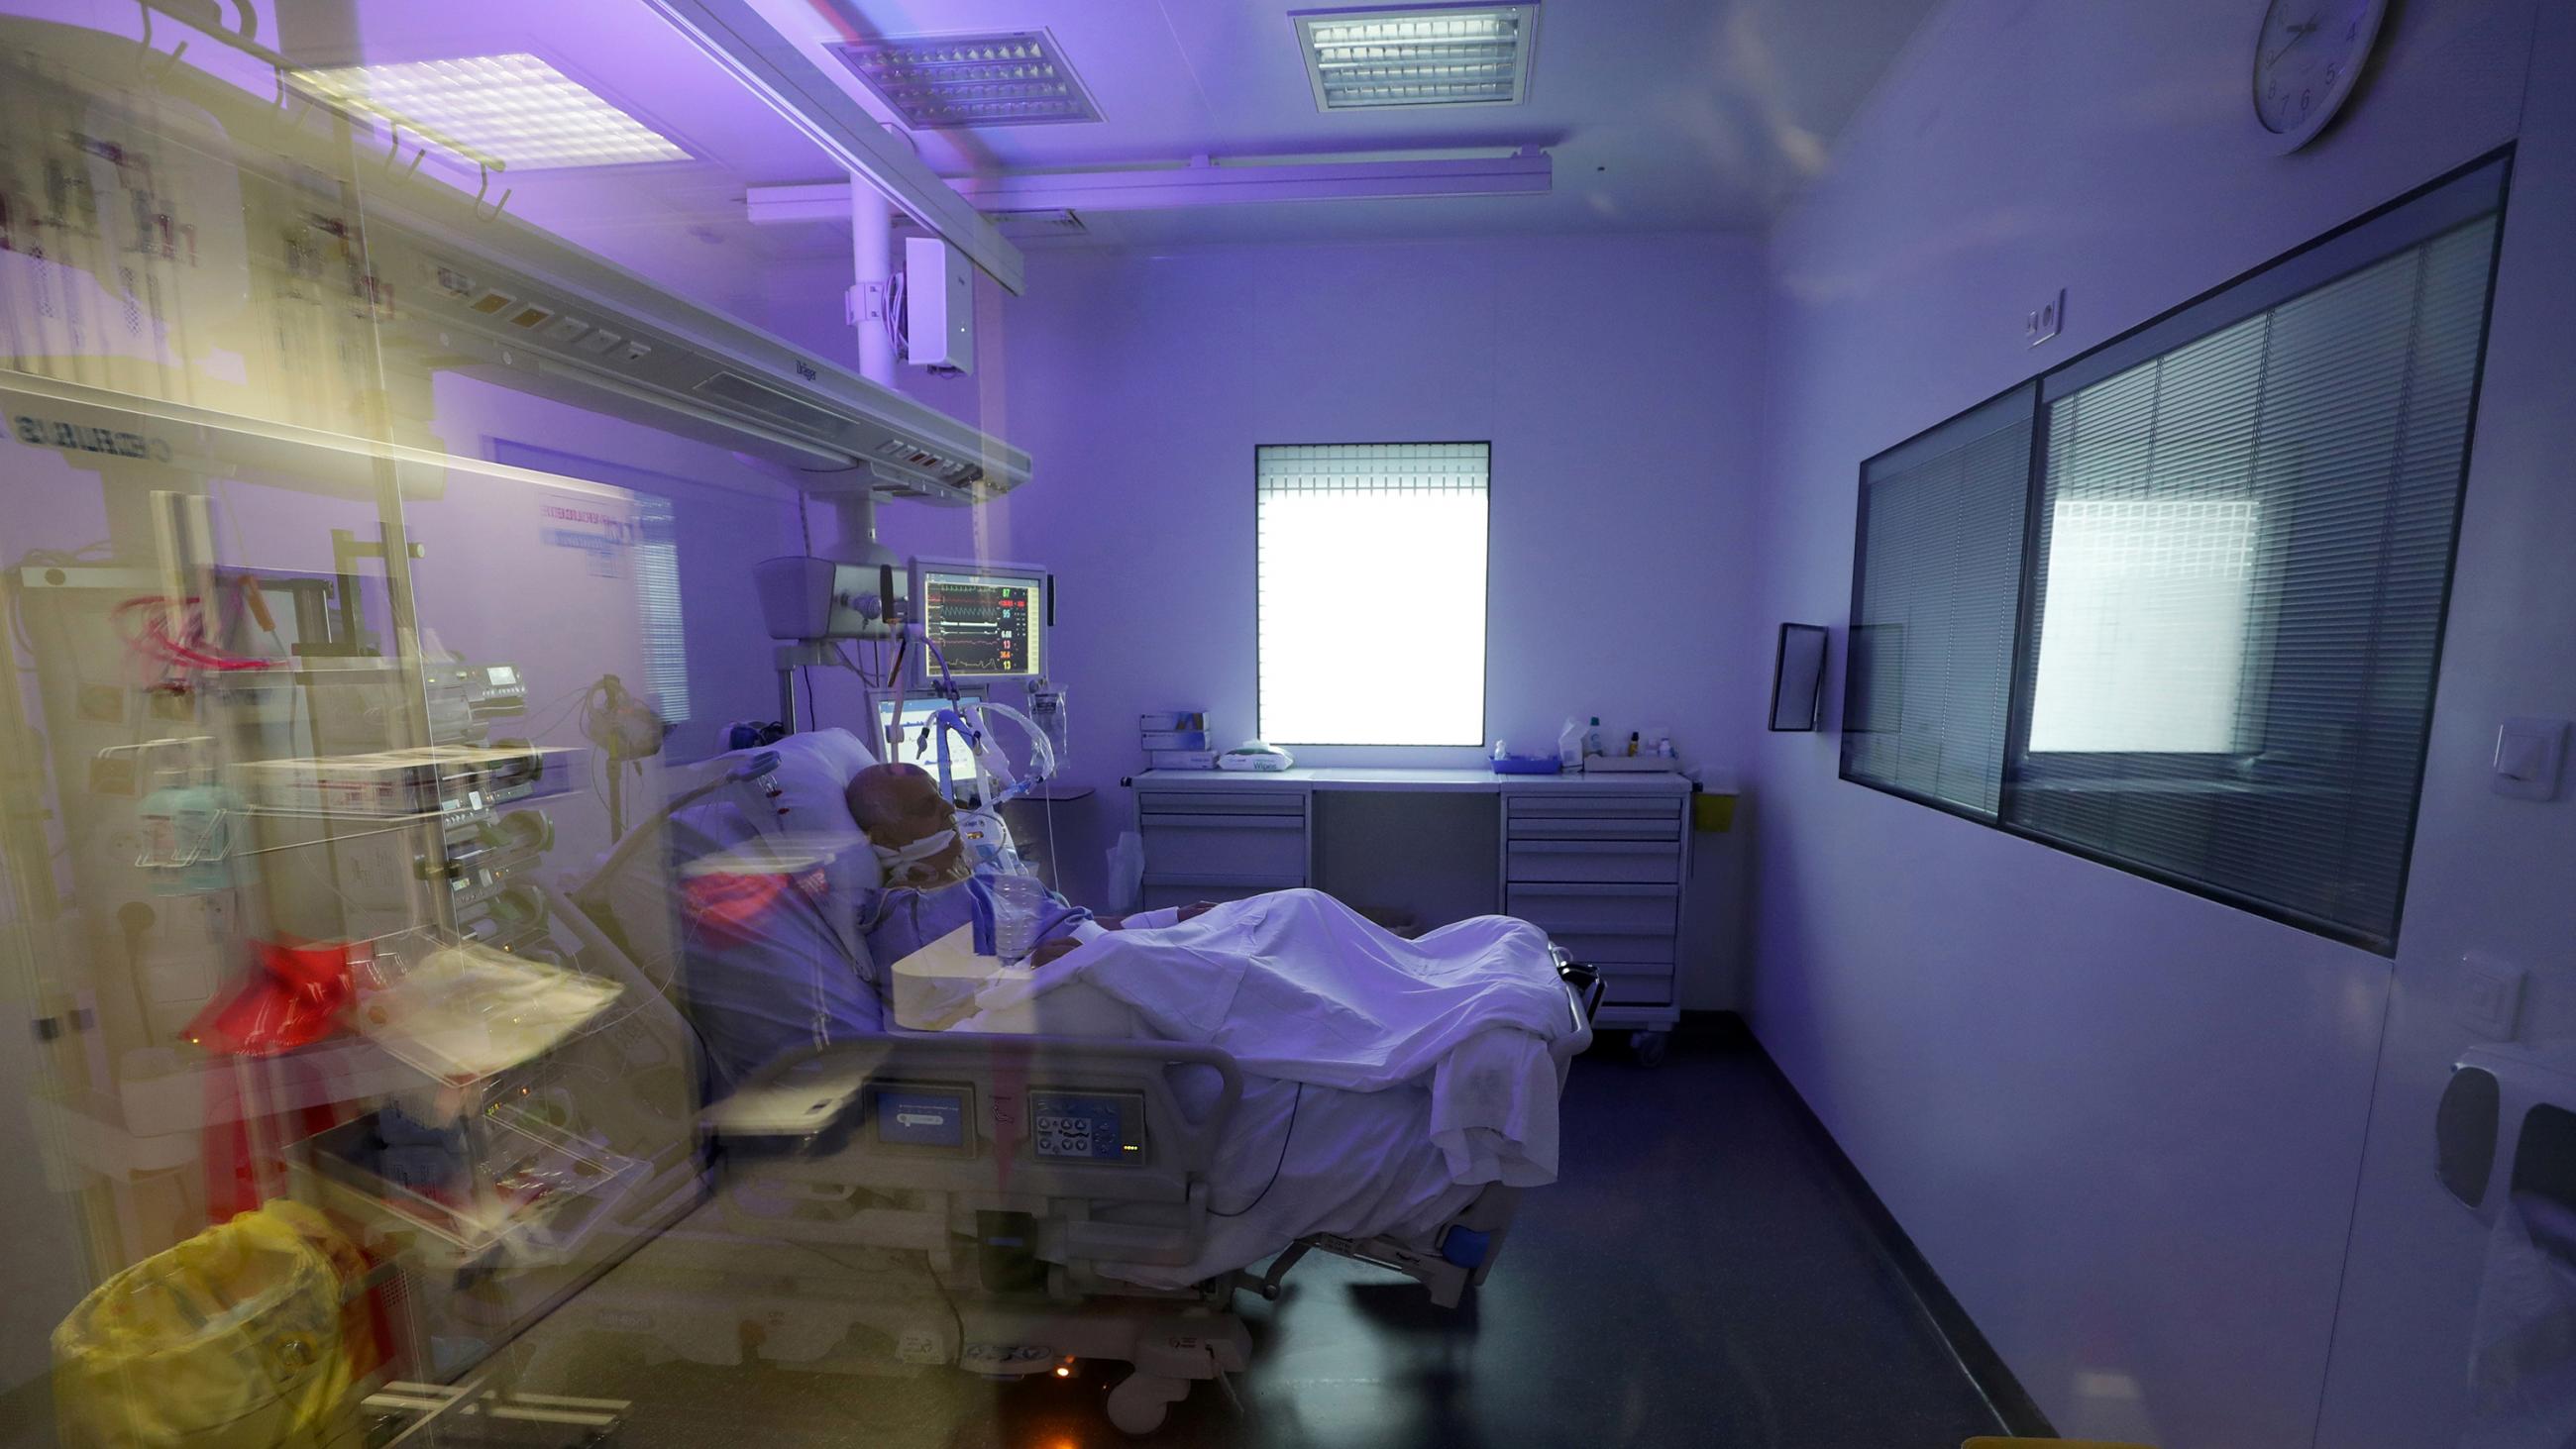 The photo shows a hospital room with a patient in a bed in the middle. The room is bathed in purple light.